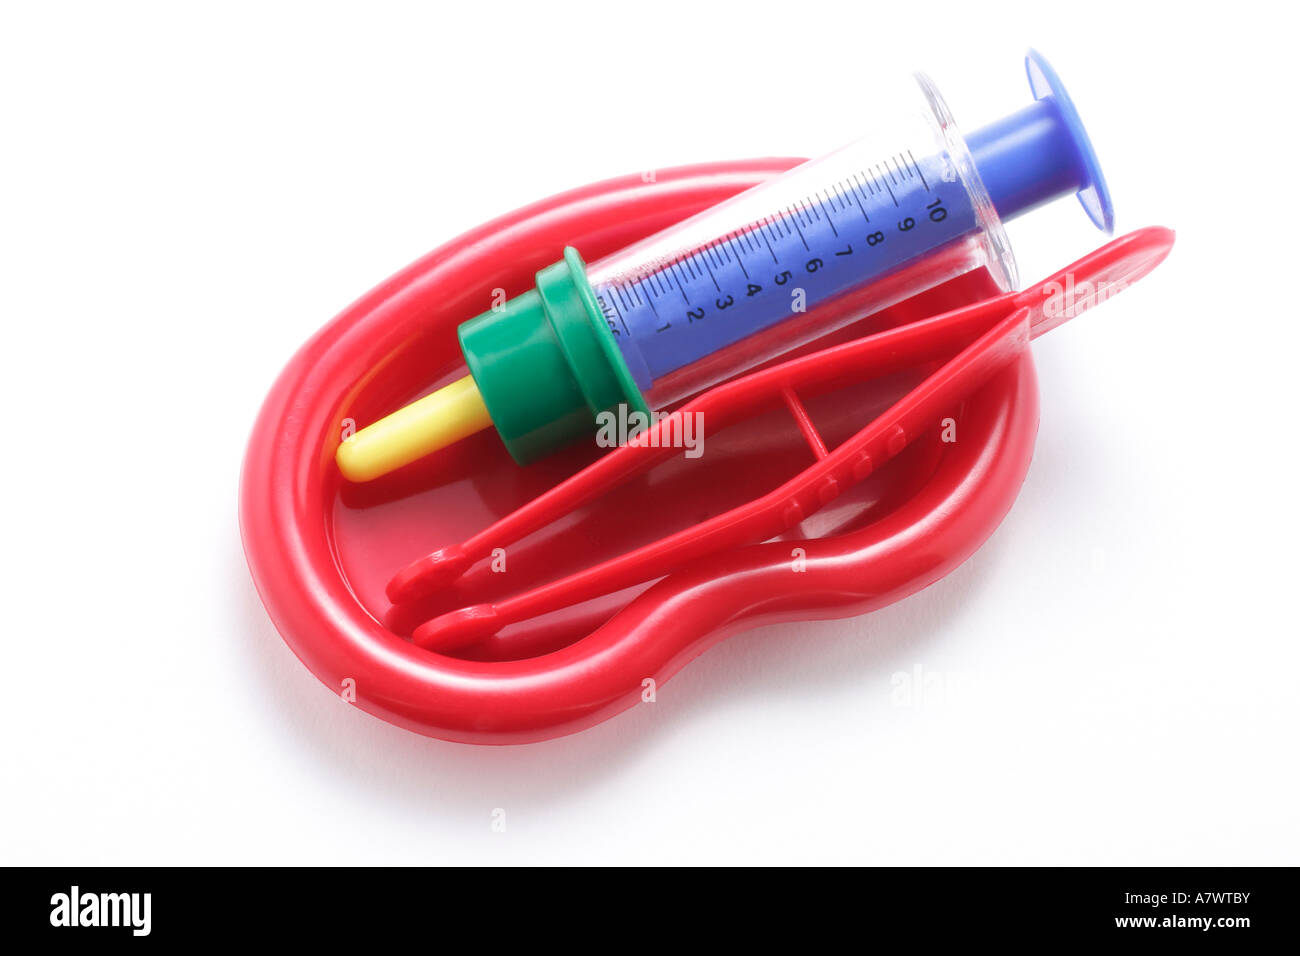 Toy Medical Equipments Stock Photo